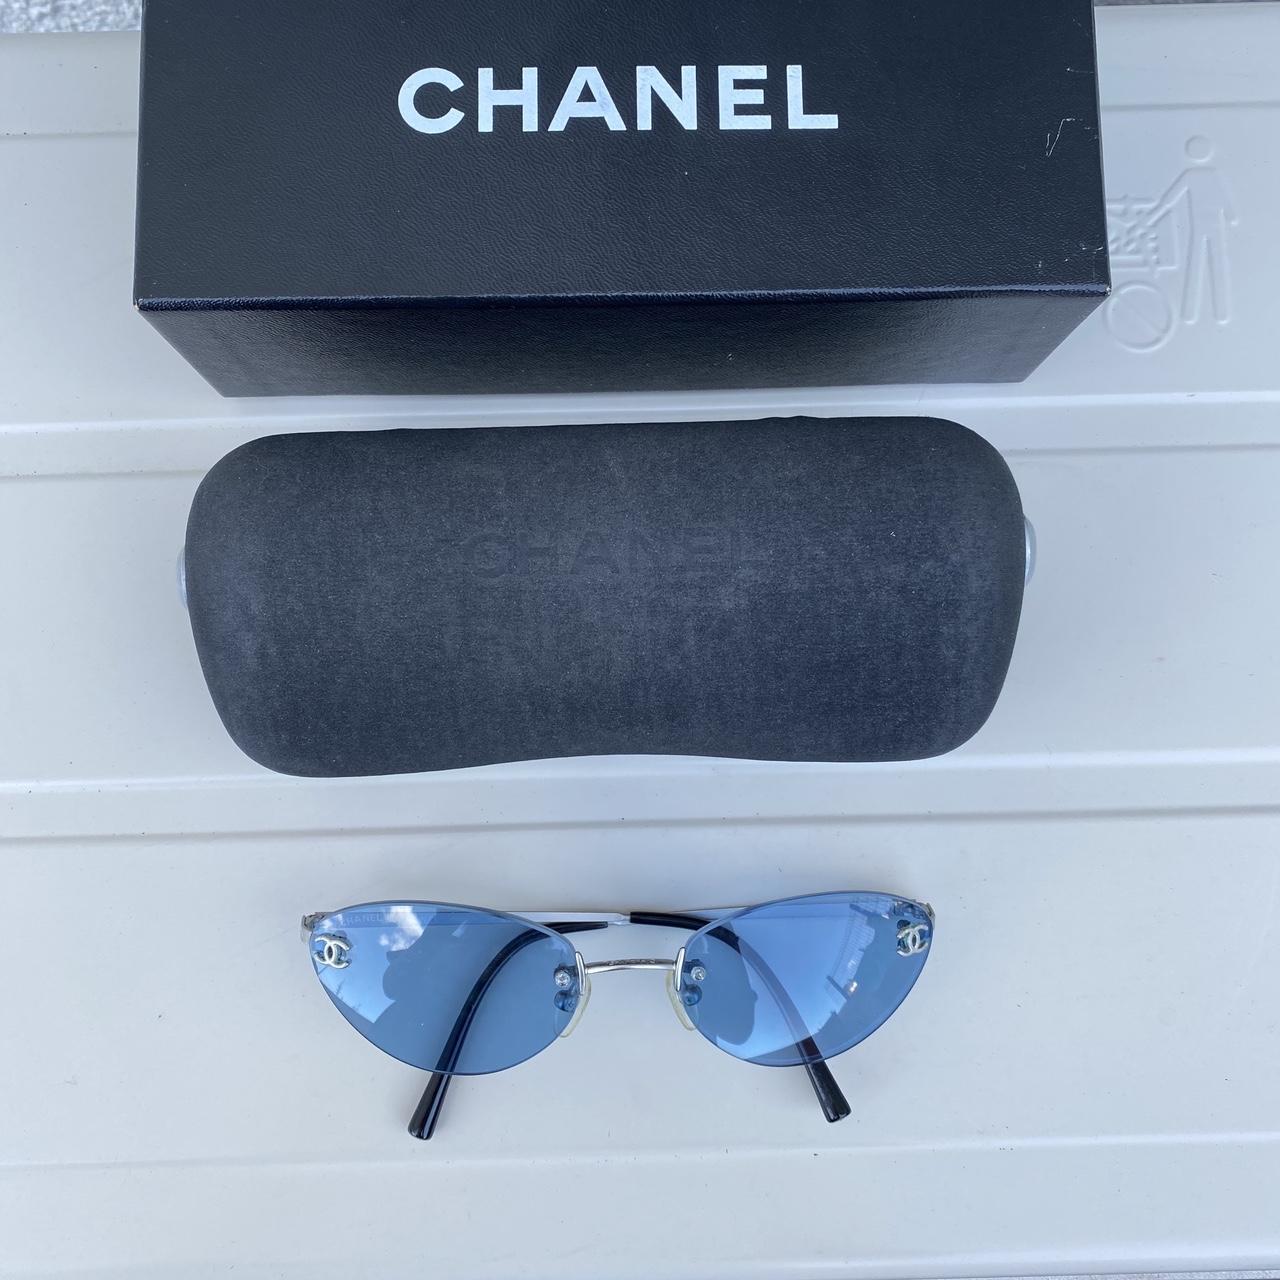 Used Chanel vintage rimless sunglasses in blue see - Depop